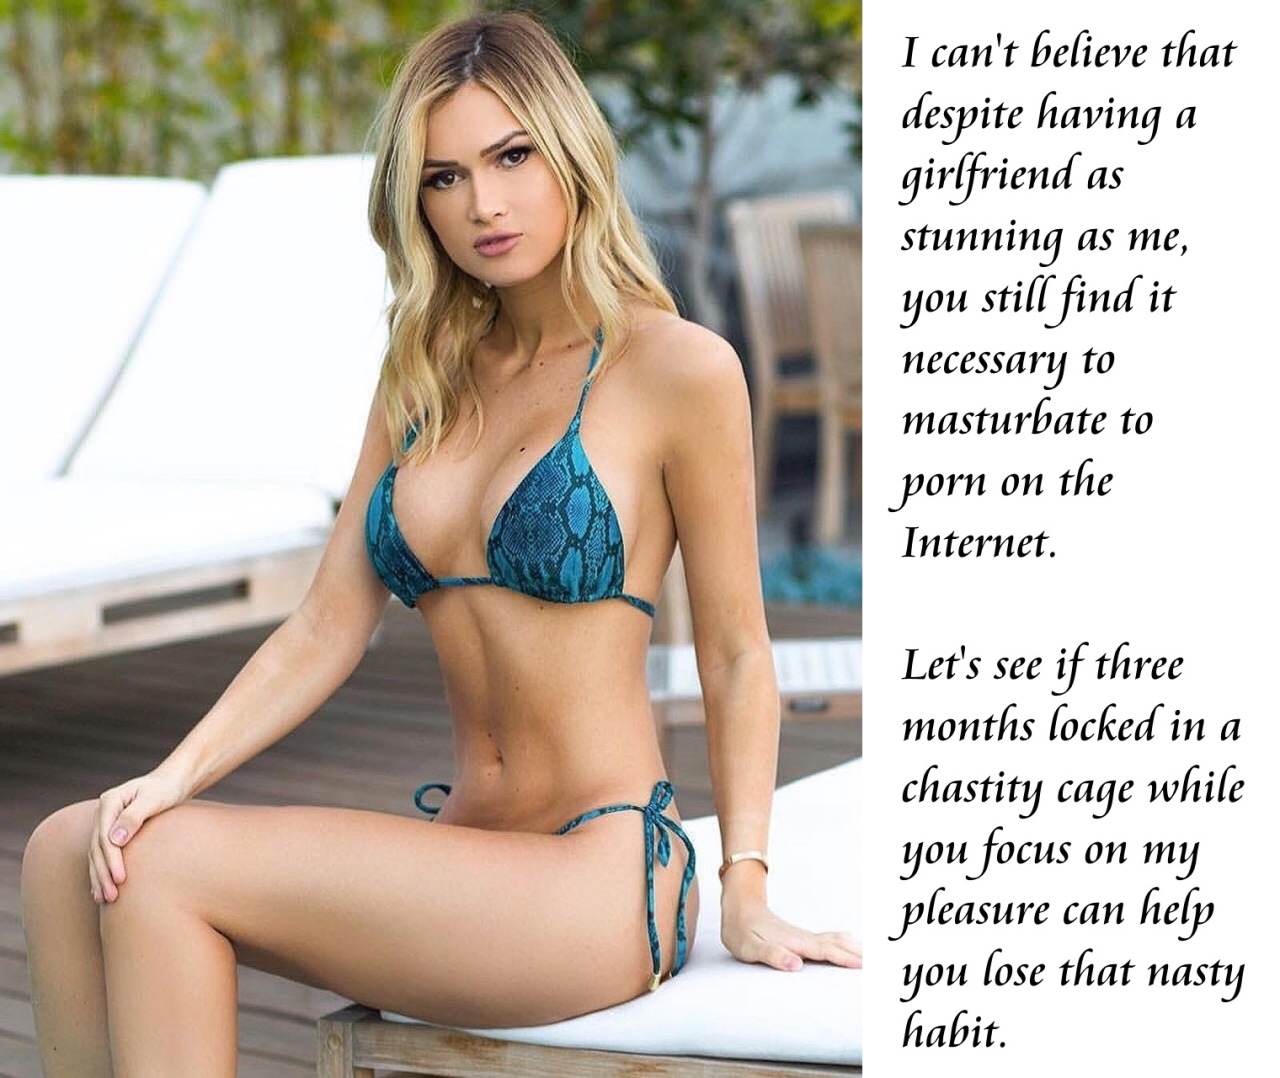 submissive-william:  I can’t believe that despite having a girlfriend as stunning